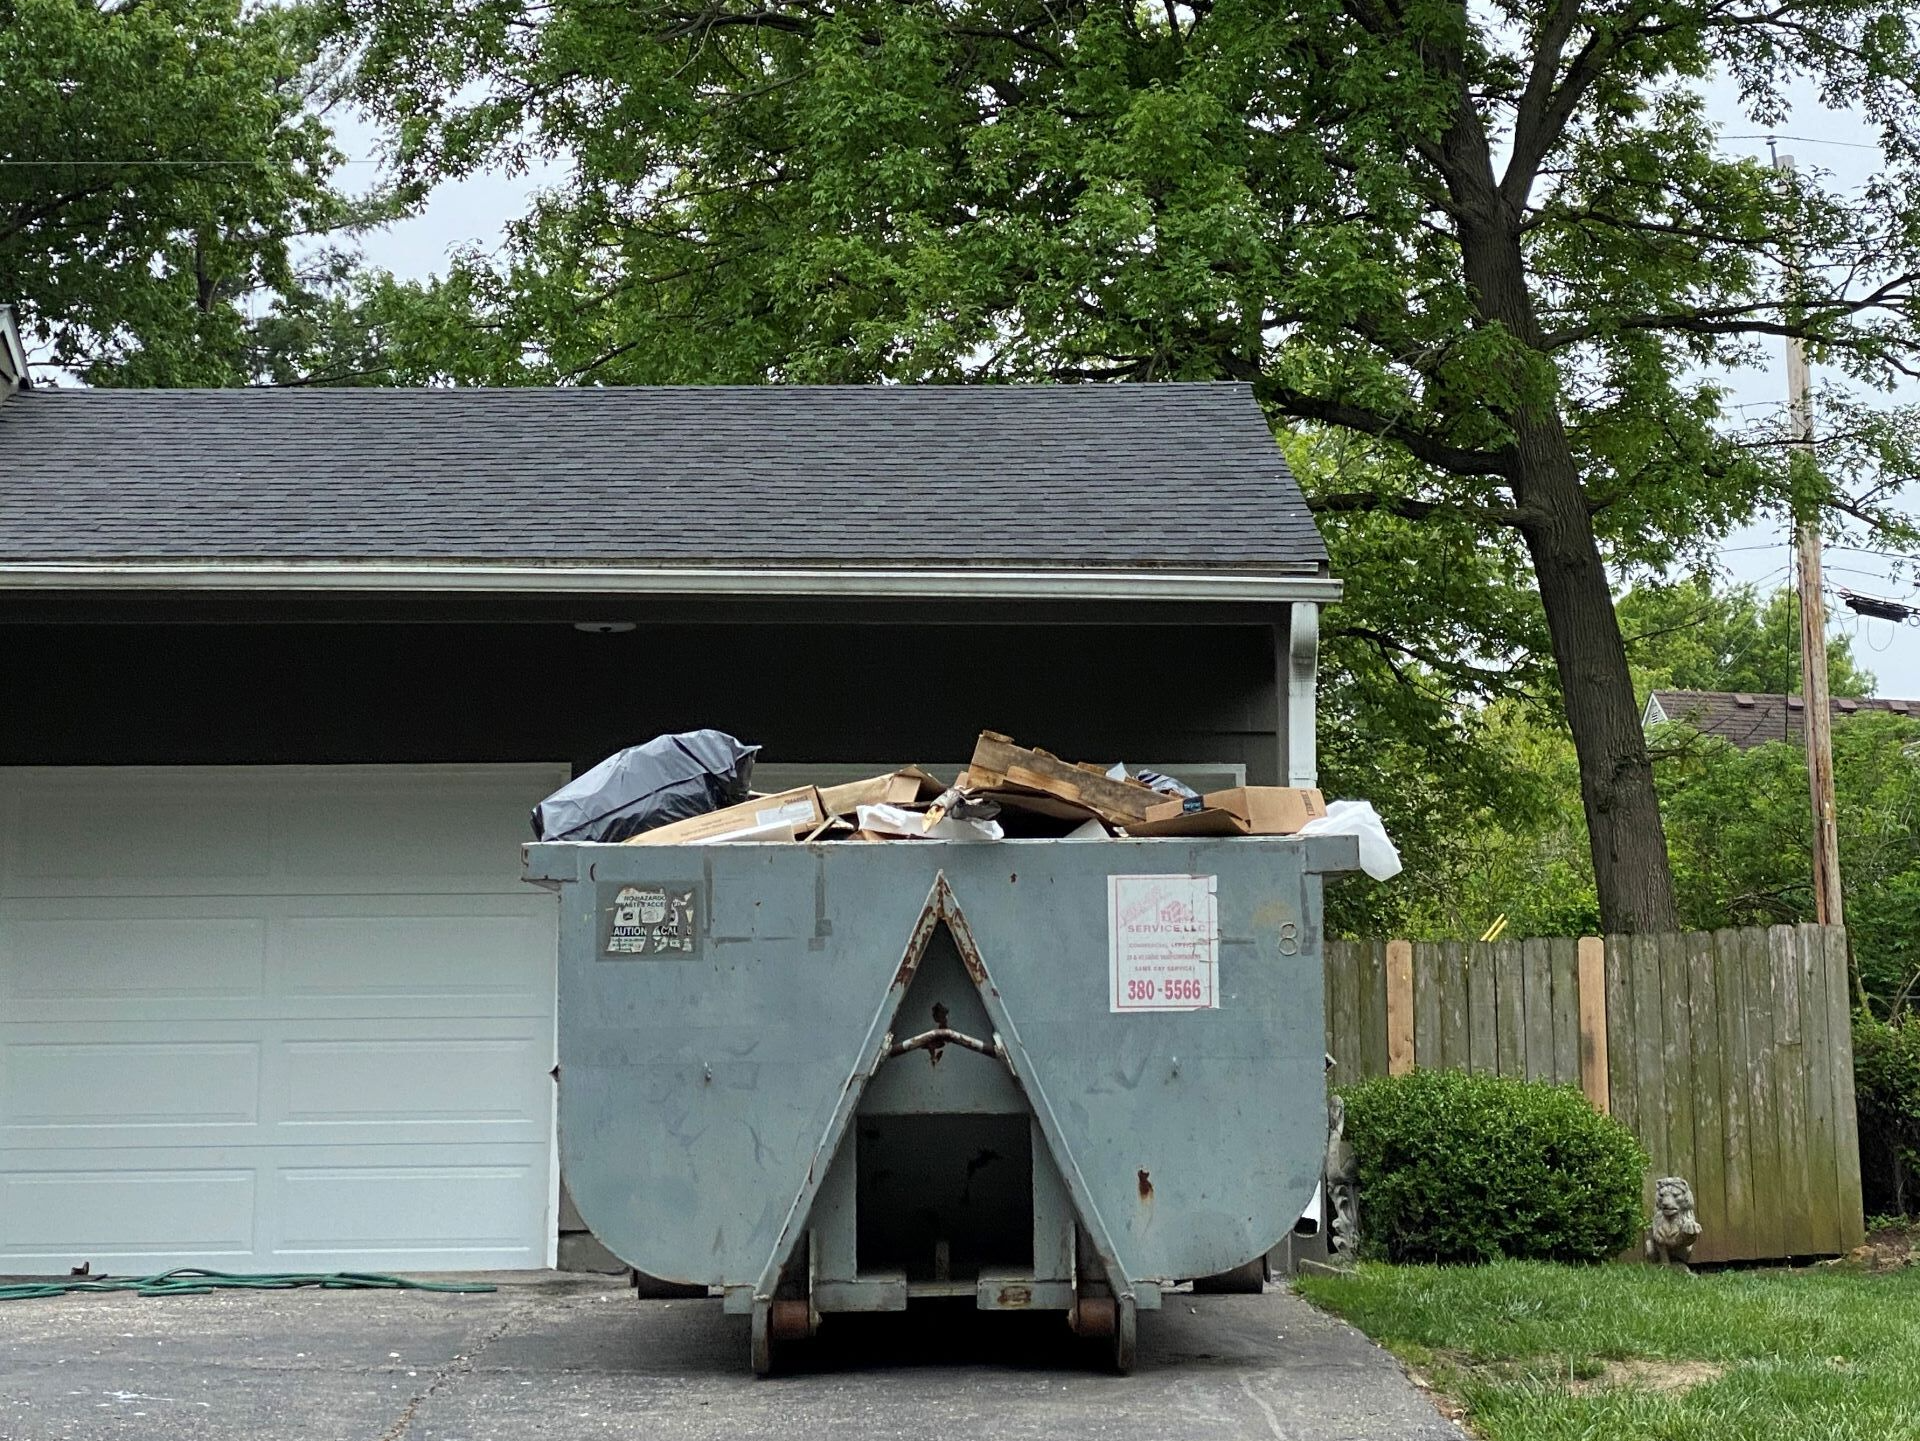 A dumpster filled with garbage is parked in front of a garage.